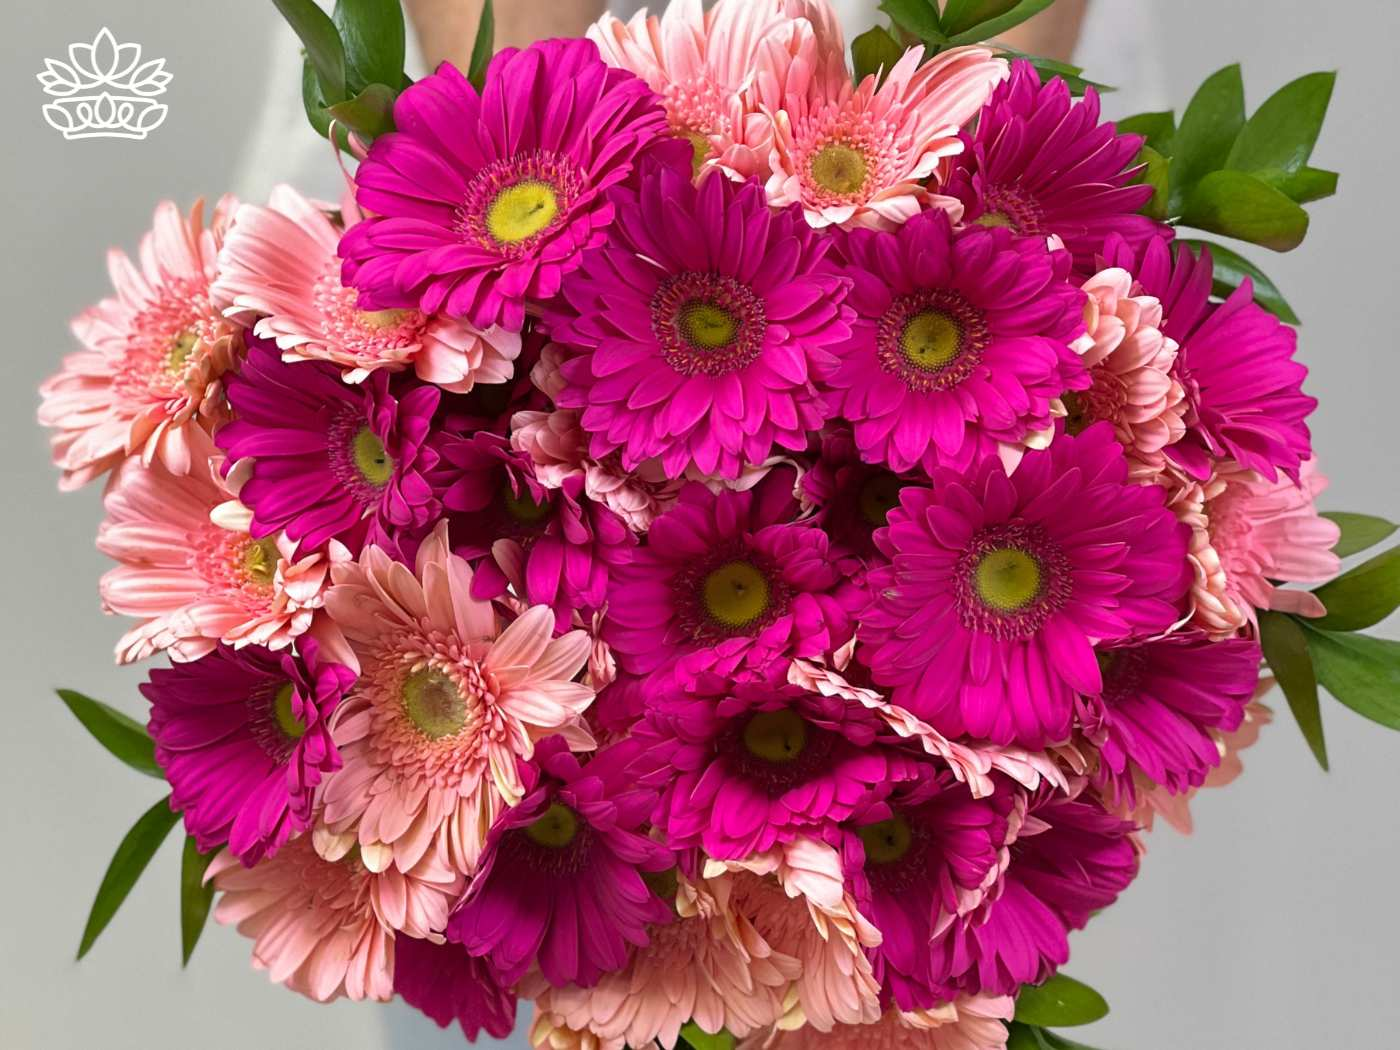 A vibrant bouquet of pink and fuchsia Gerbera daisies, arranged with lush green foliage. Fabulous Flowers and Gifts. Gerberas Collection. Delivered with Heart.